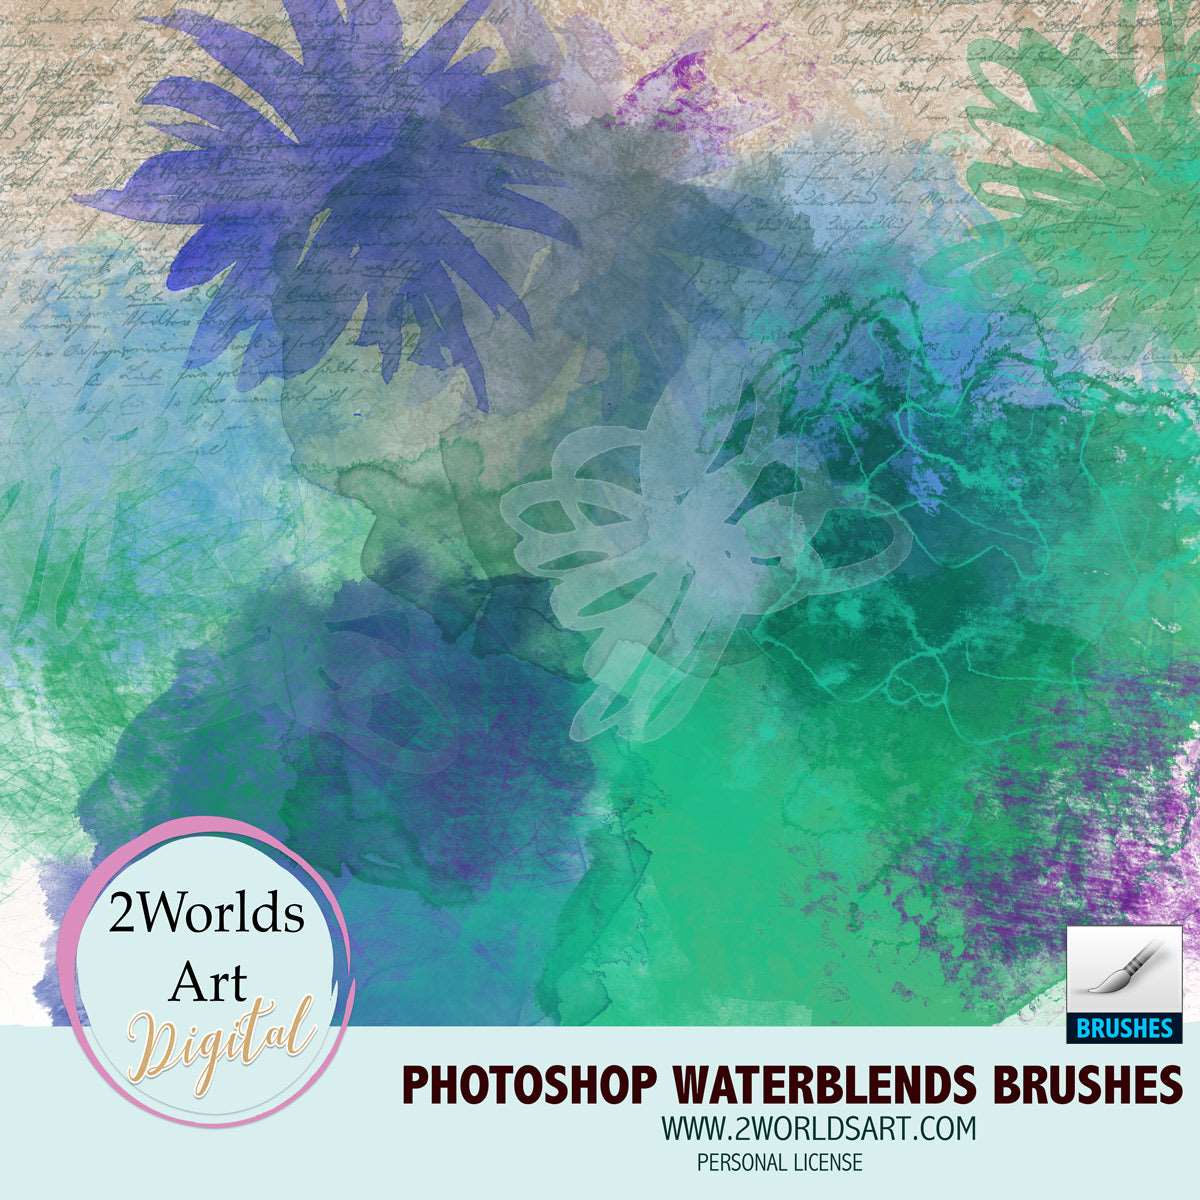 Waterblend Dynamic Photoshop Brushes